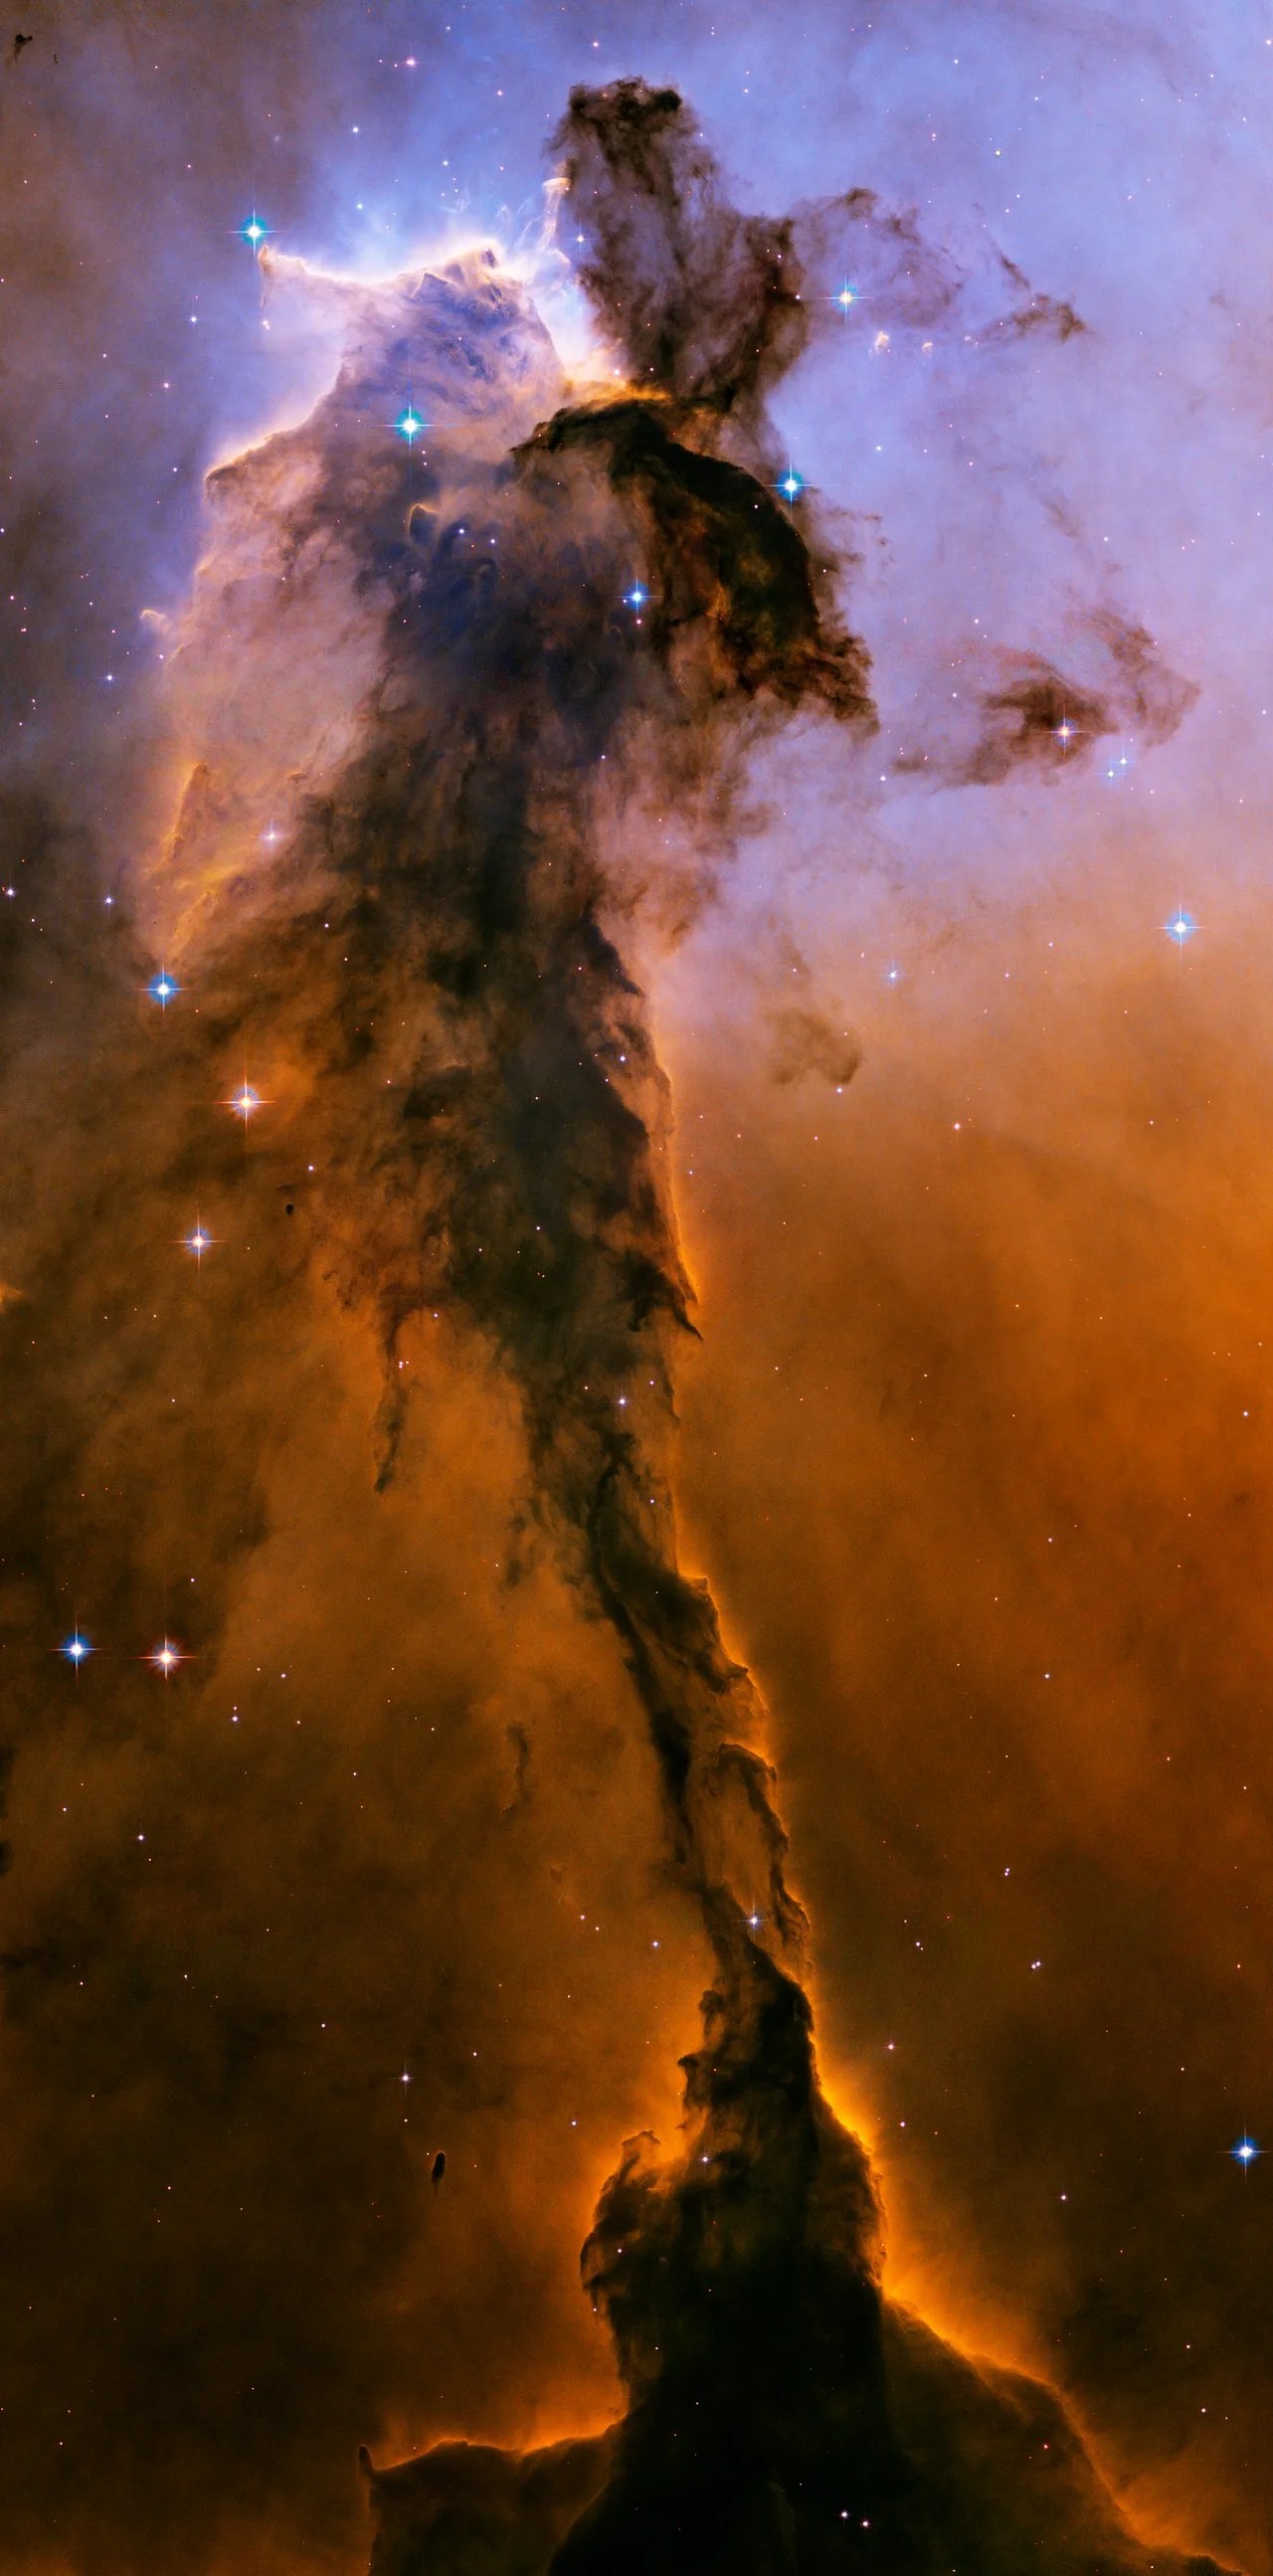 Hubble view of spire within M16